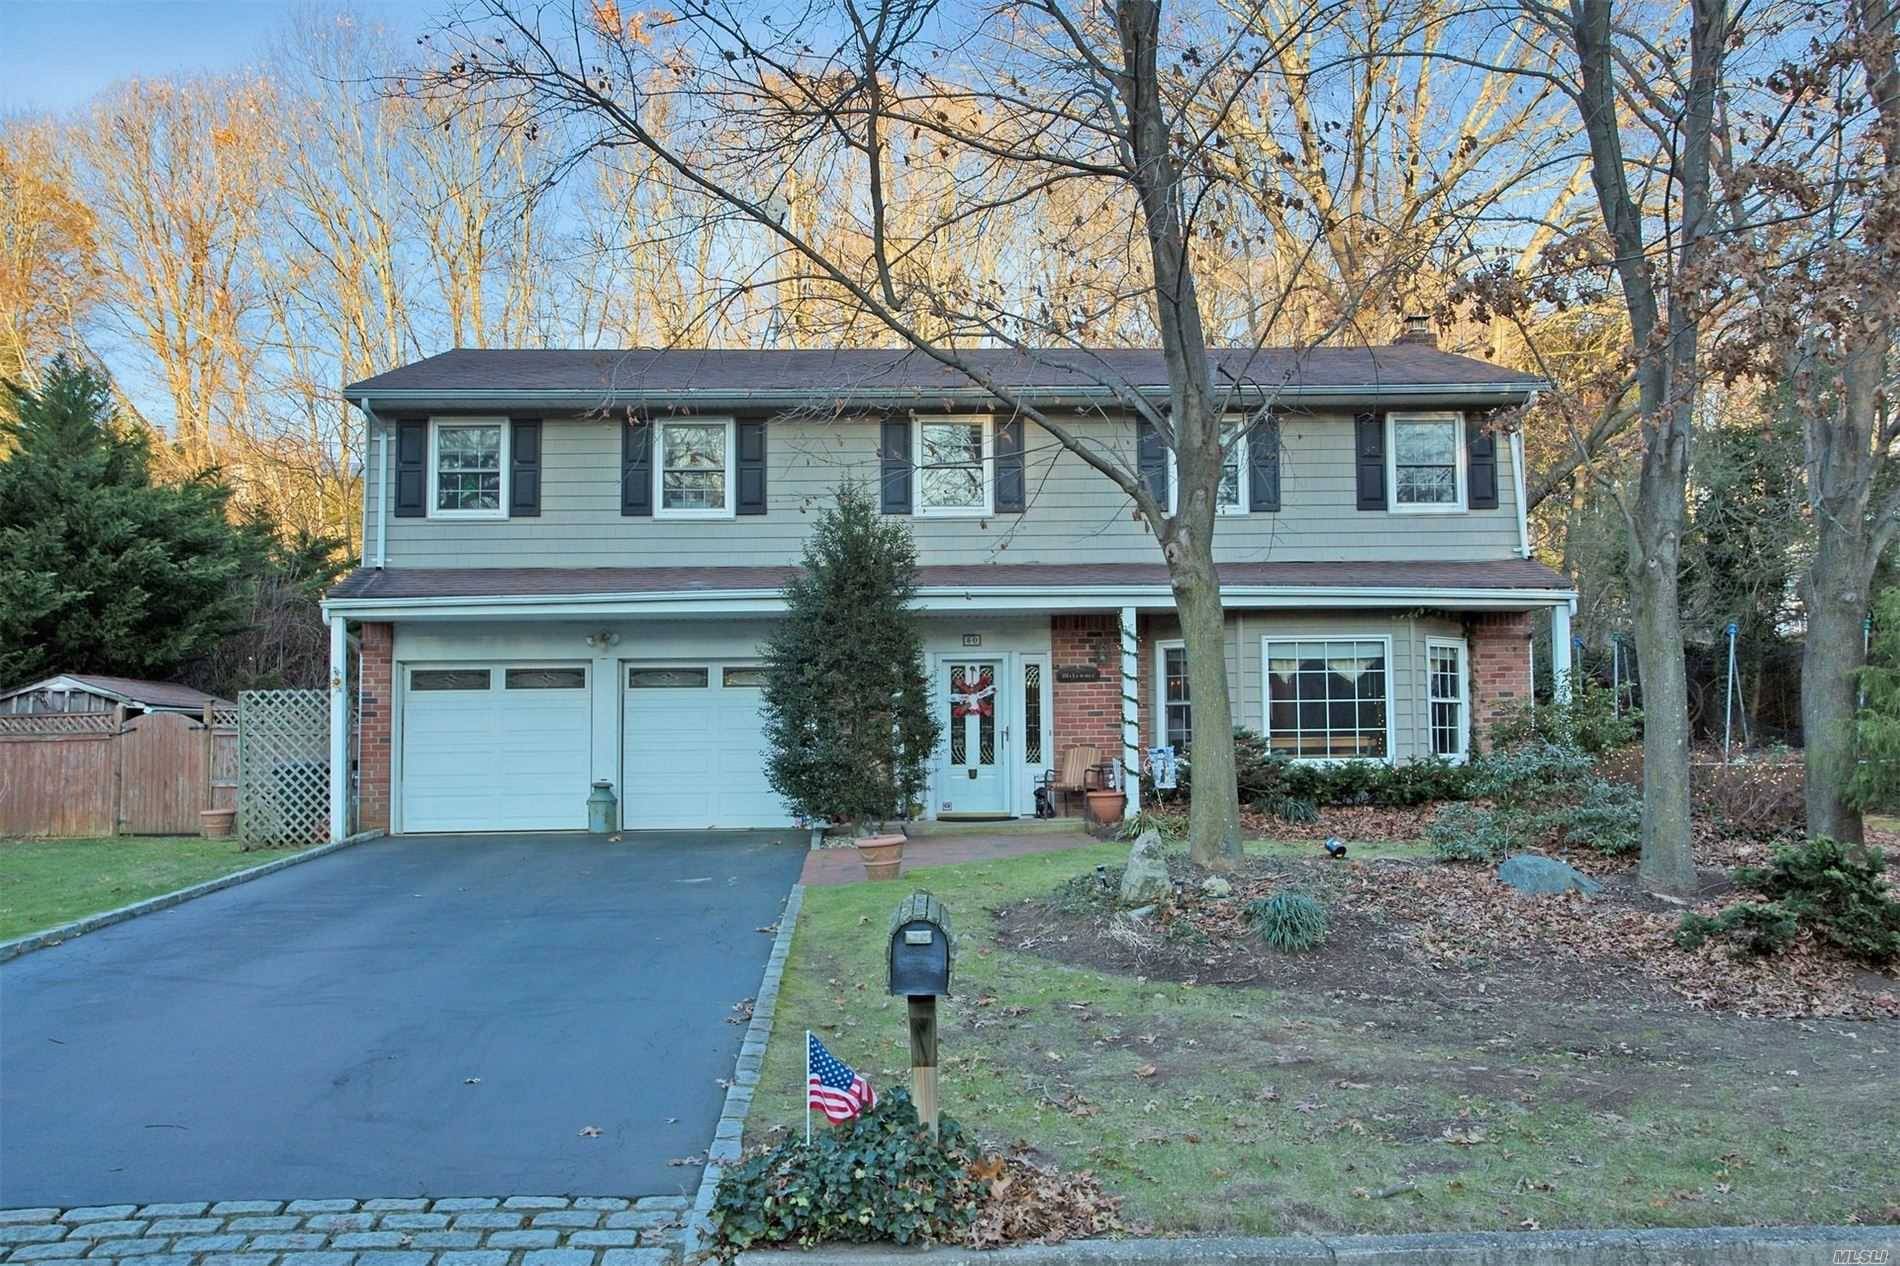 Lovely Colonial with 4 bedrooms and 2.